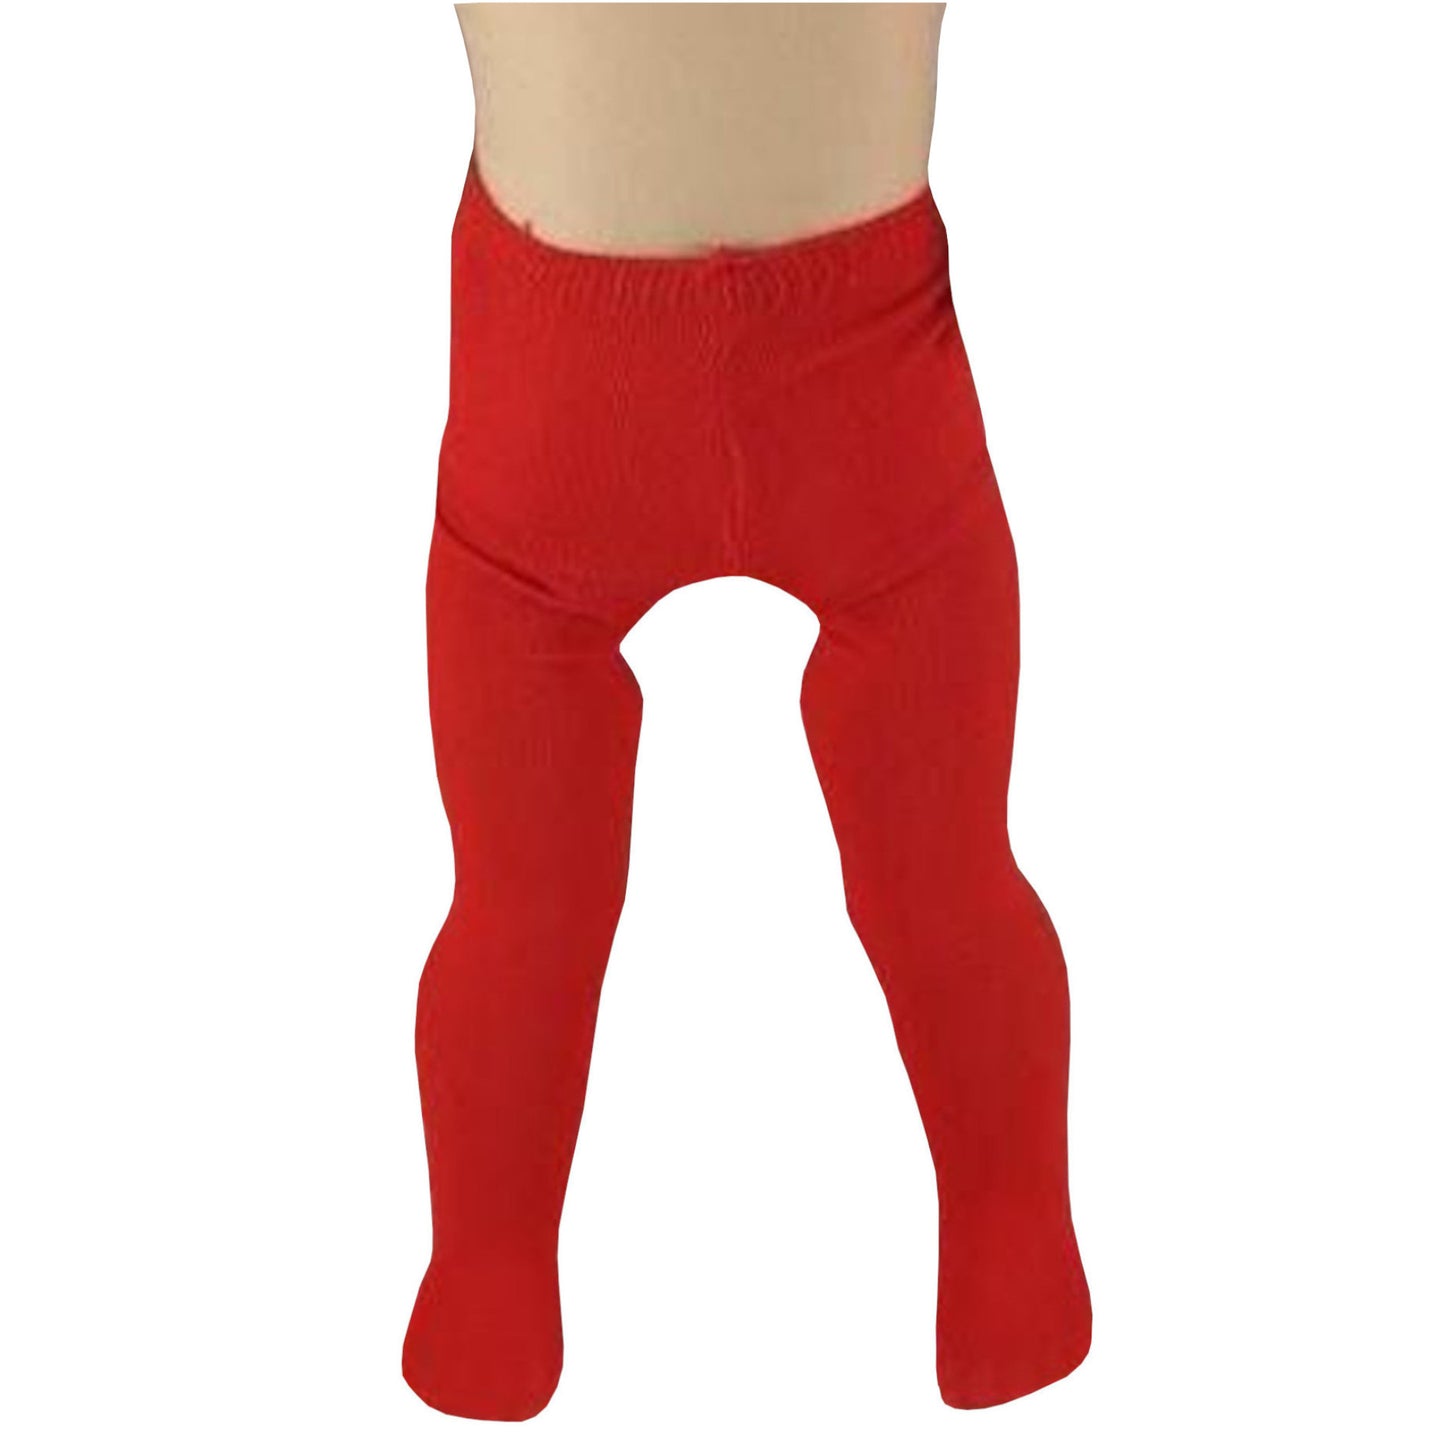 Red Nylon Tights for 18-inch dolls with doll